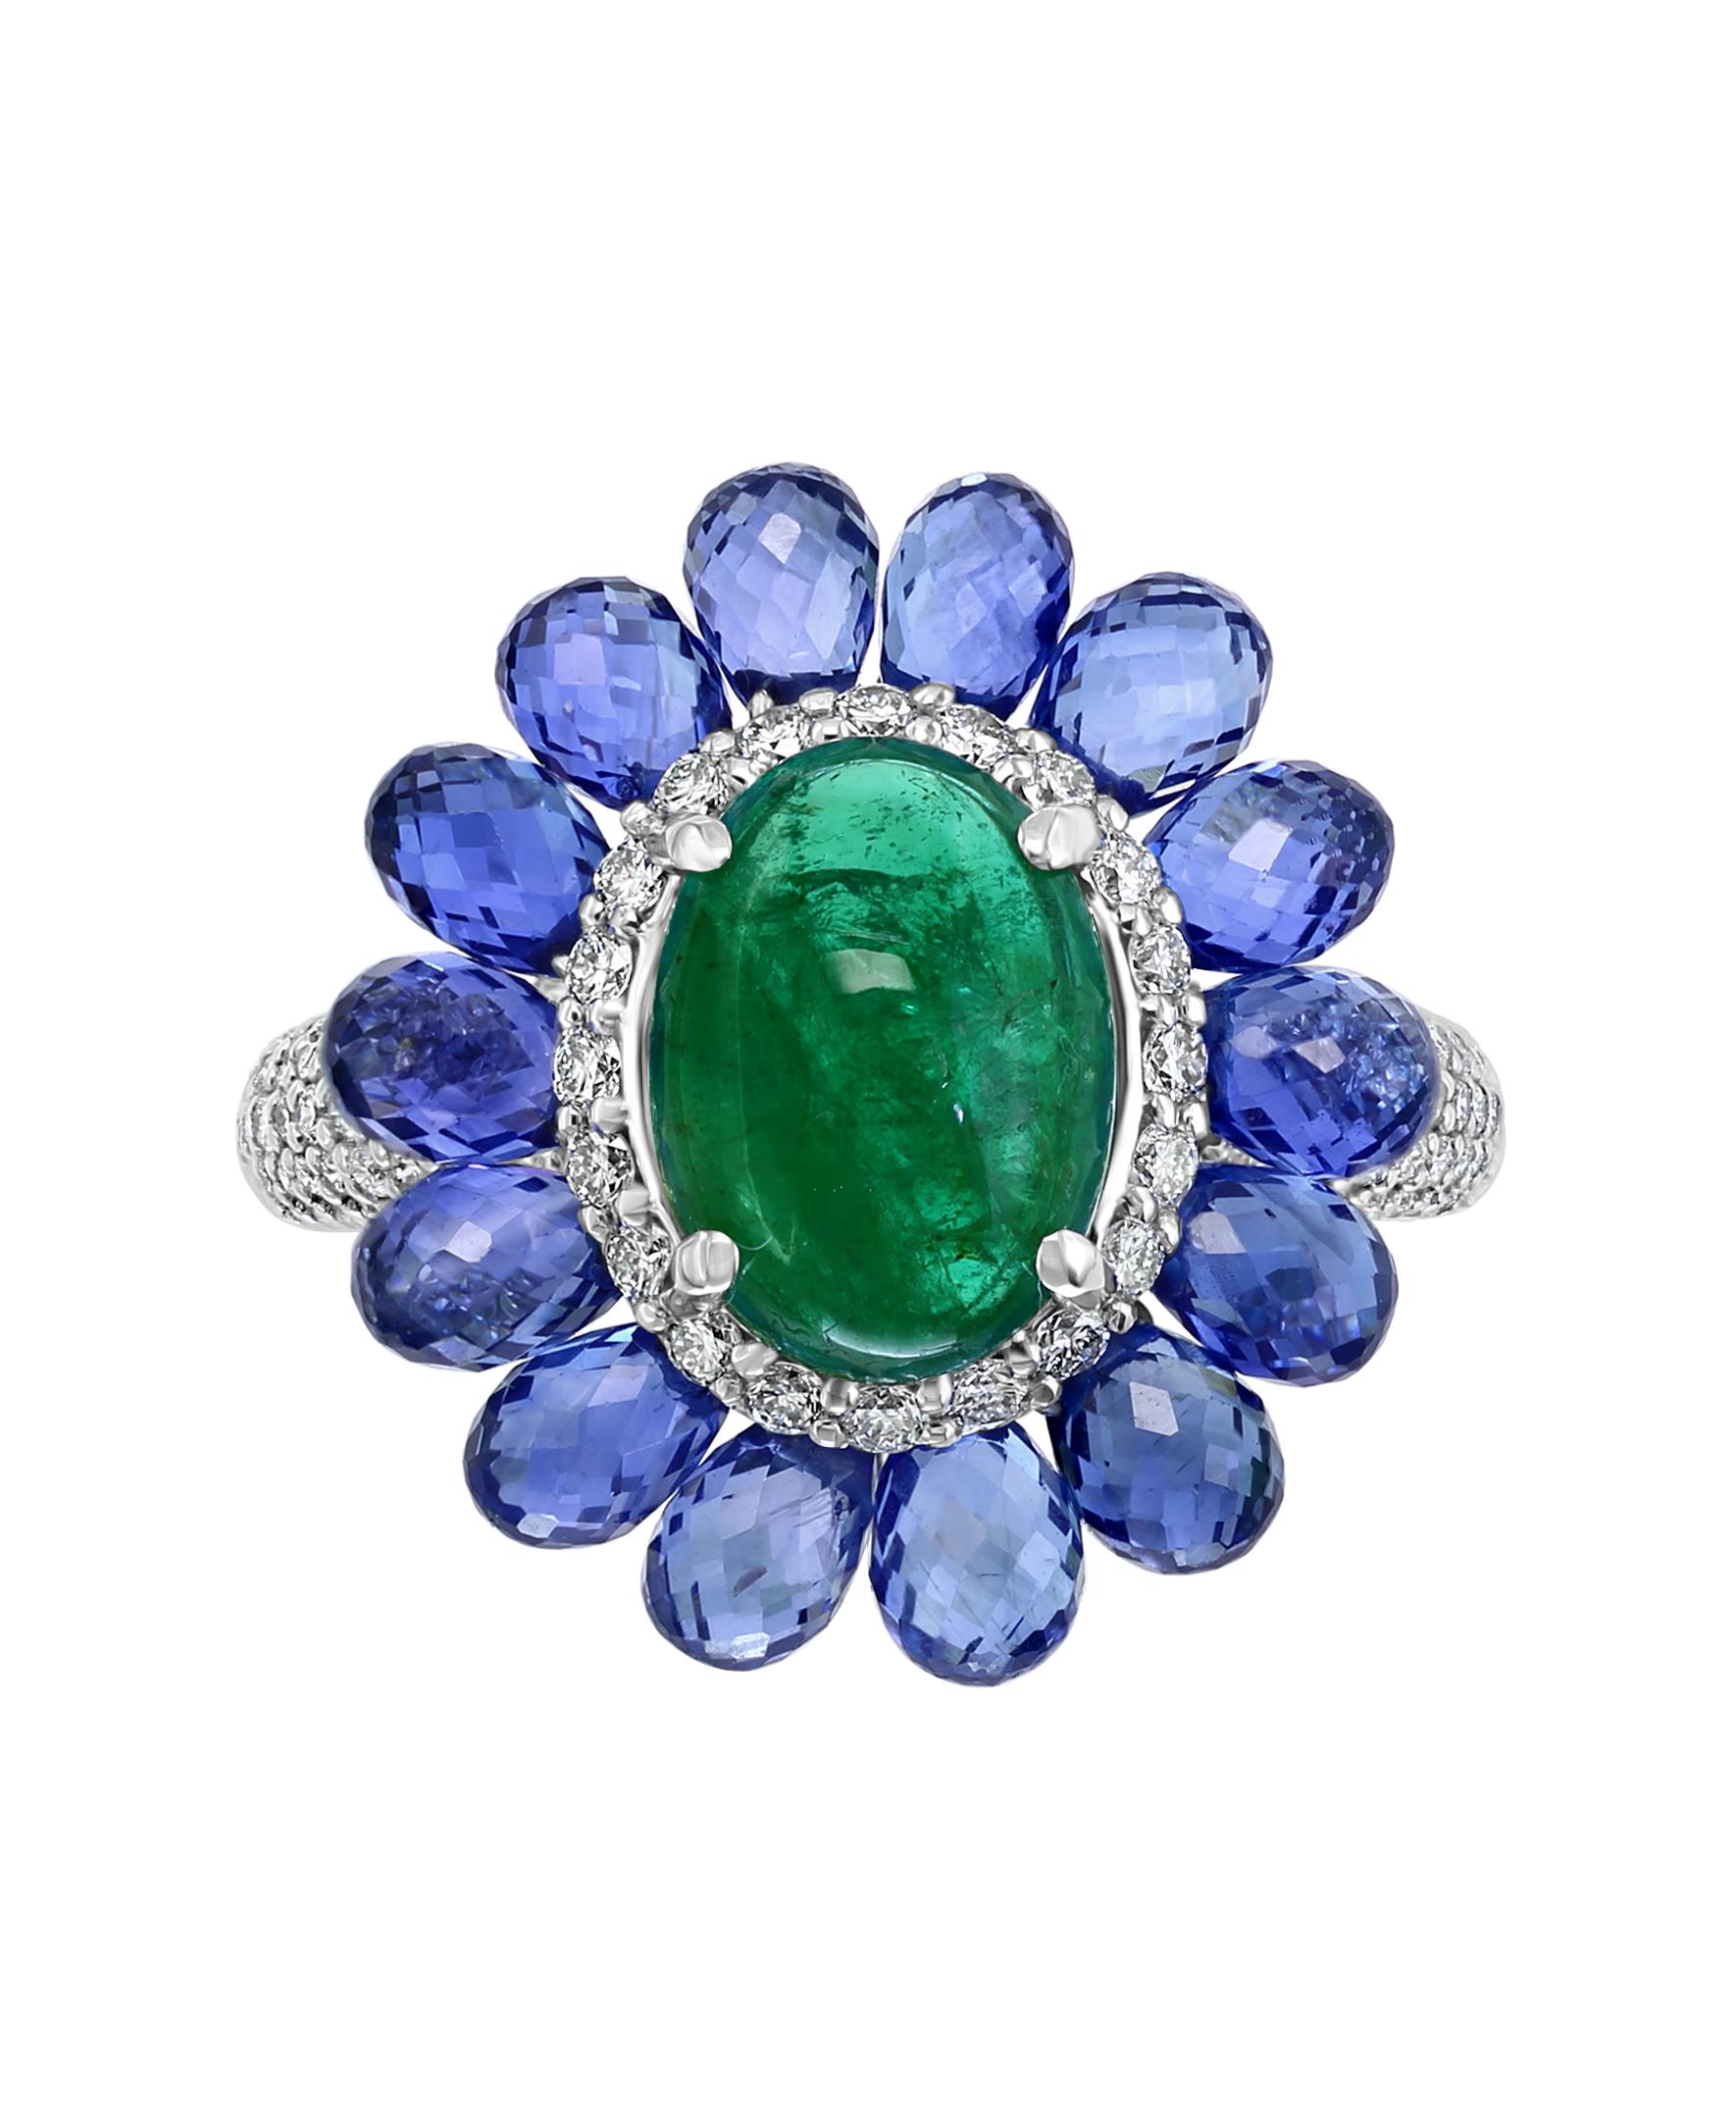 This ring is a truly unique mix of precious gemstones, each with their own unique shapes and cuts.
This Effy Hematian ring is set in 18K White gold, with a fine large center stone cabochon cut emerald that weighs 2.73 ct. The center stone is